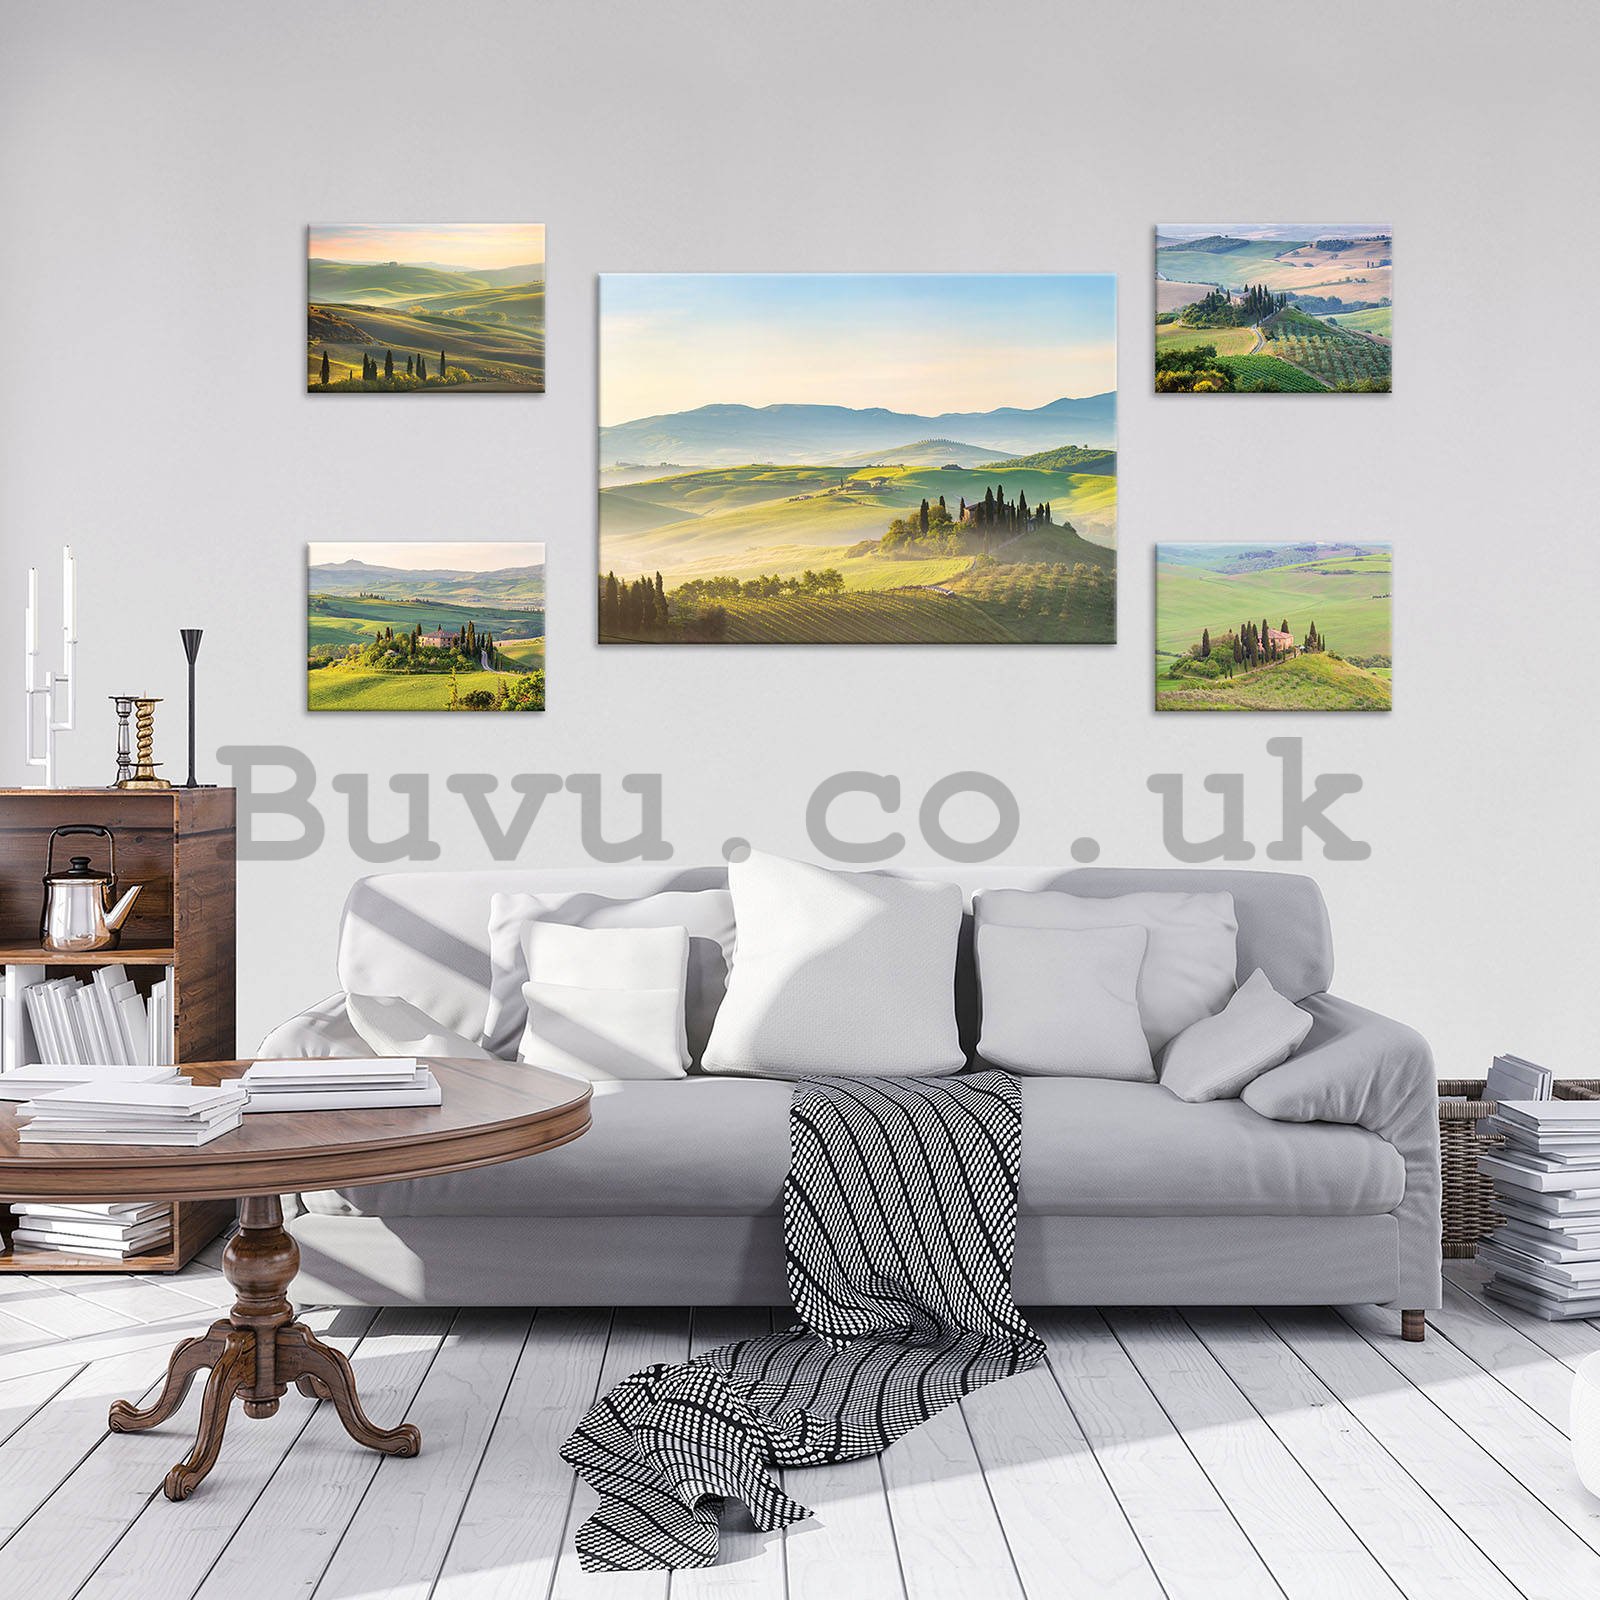 Painting on canvas: Tuscany - set 1pc 70x50 cm and 4pc 32,4x22,8 cm